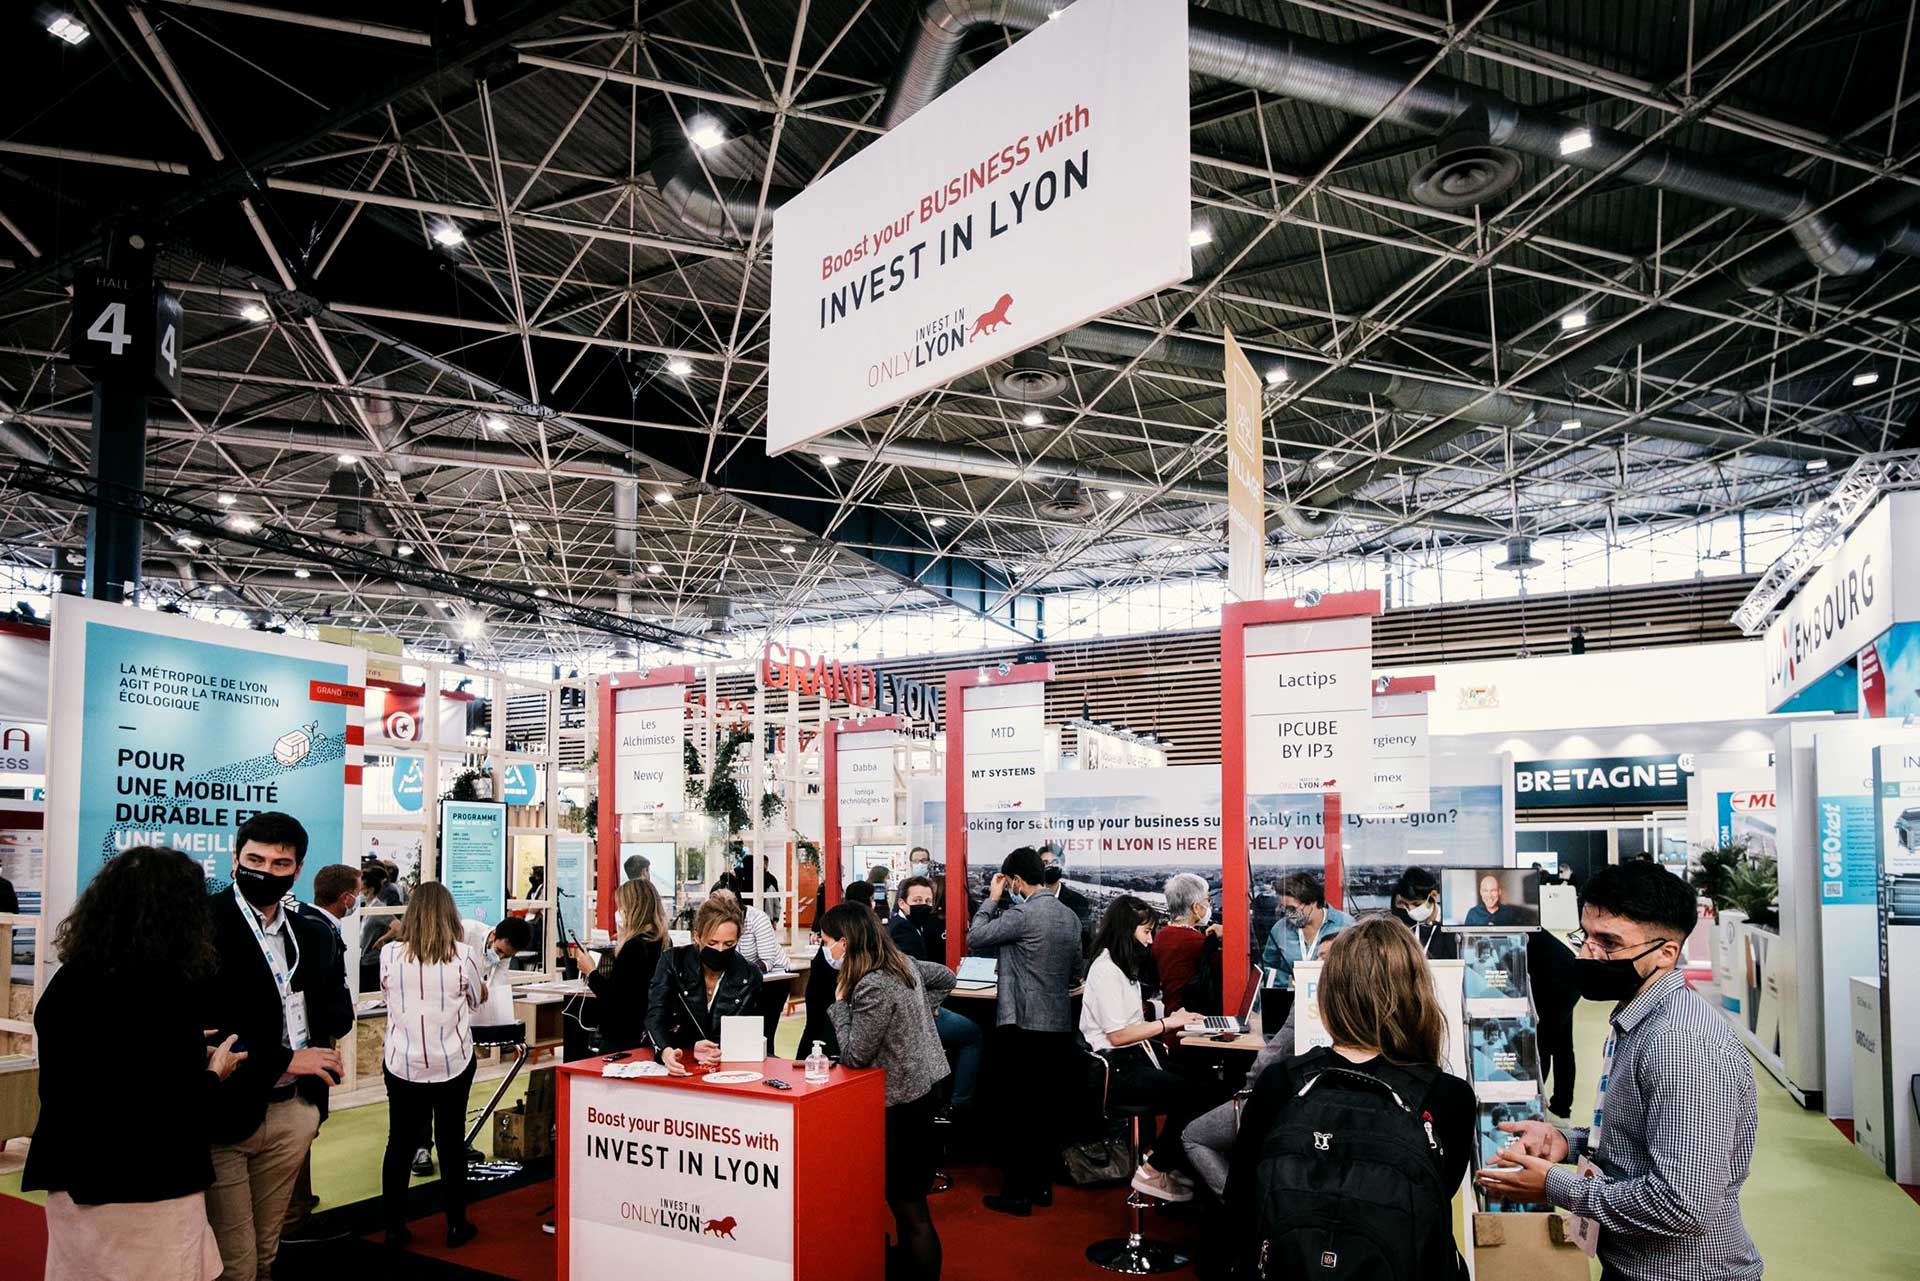 stand "Boost your business with Invest in Lyon", lors du salon Pollutec 2021 à Eurexpo Lyon